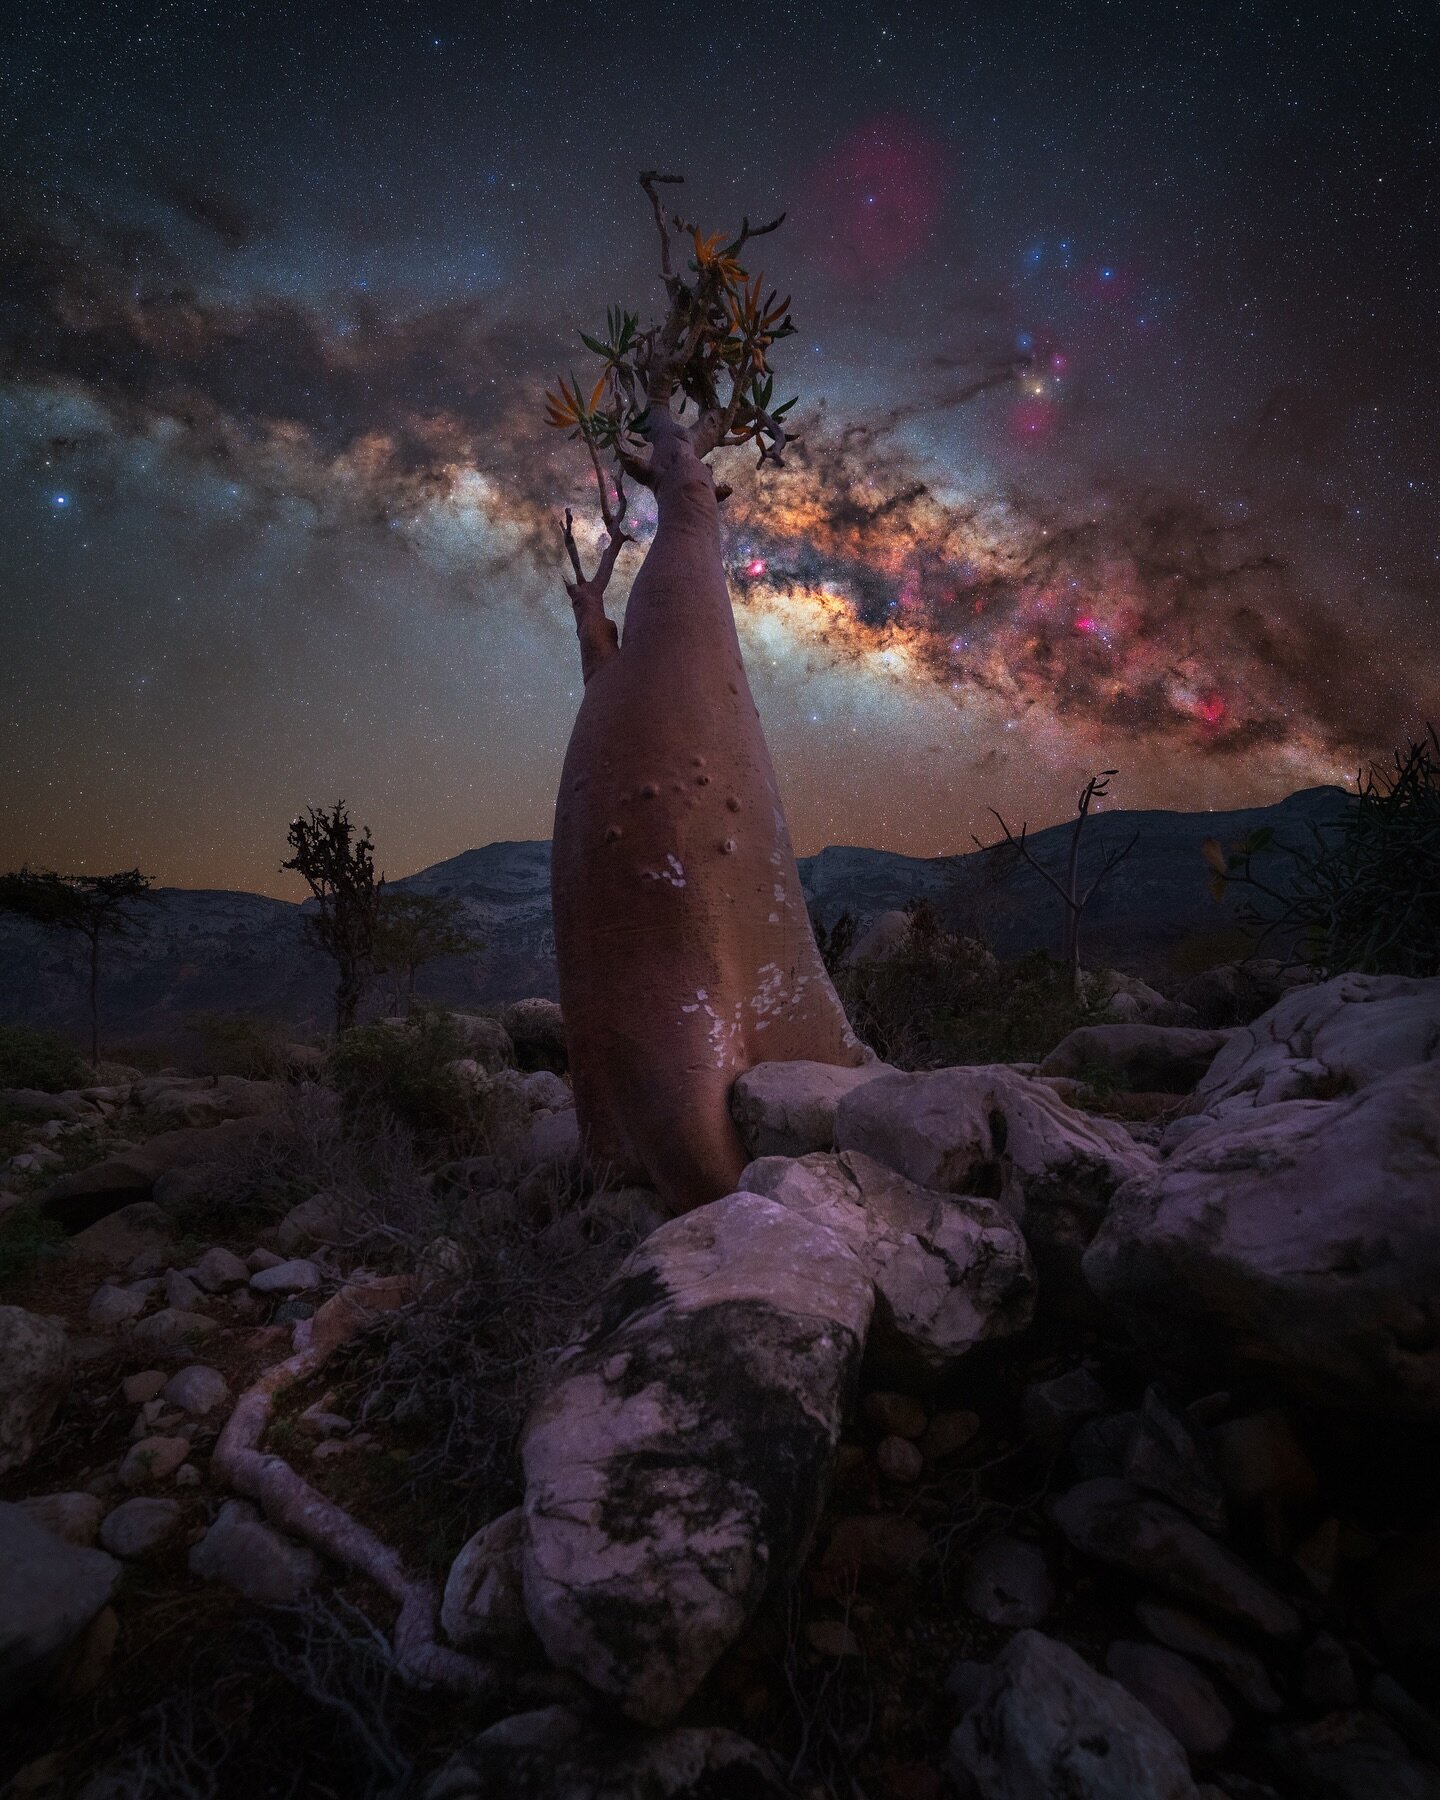 Bottle Tree 

In just over a week I will be back in one of my favourite night sky photography locations on this planet! And I am looking so forward  to discovering new trees and compositions with my group there! 

Fingers crossed for clear skies 🤞🏼